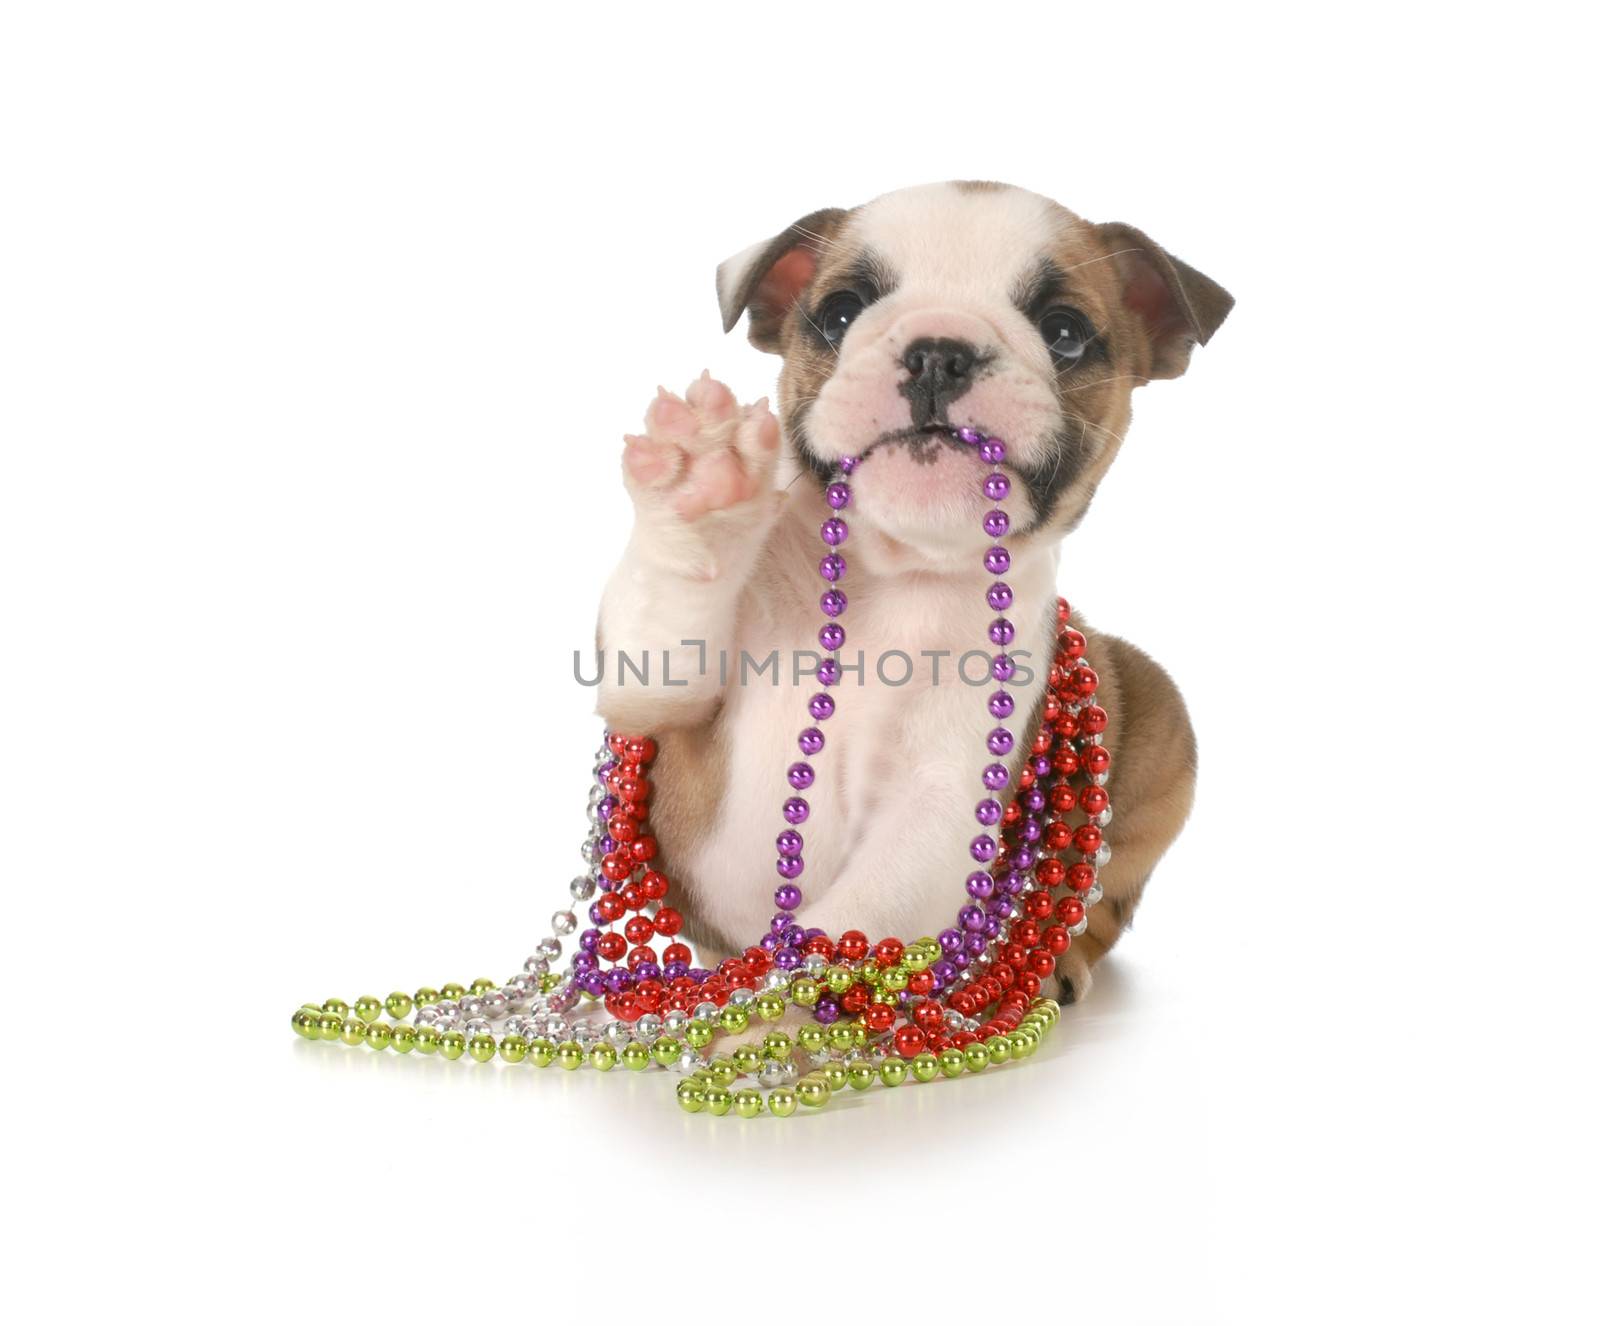 playful puppy chewing on beads - english bulldog 7 weeks old isolated on white background